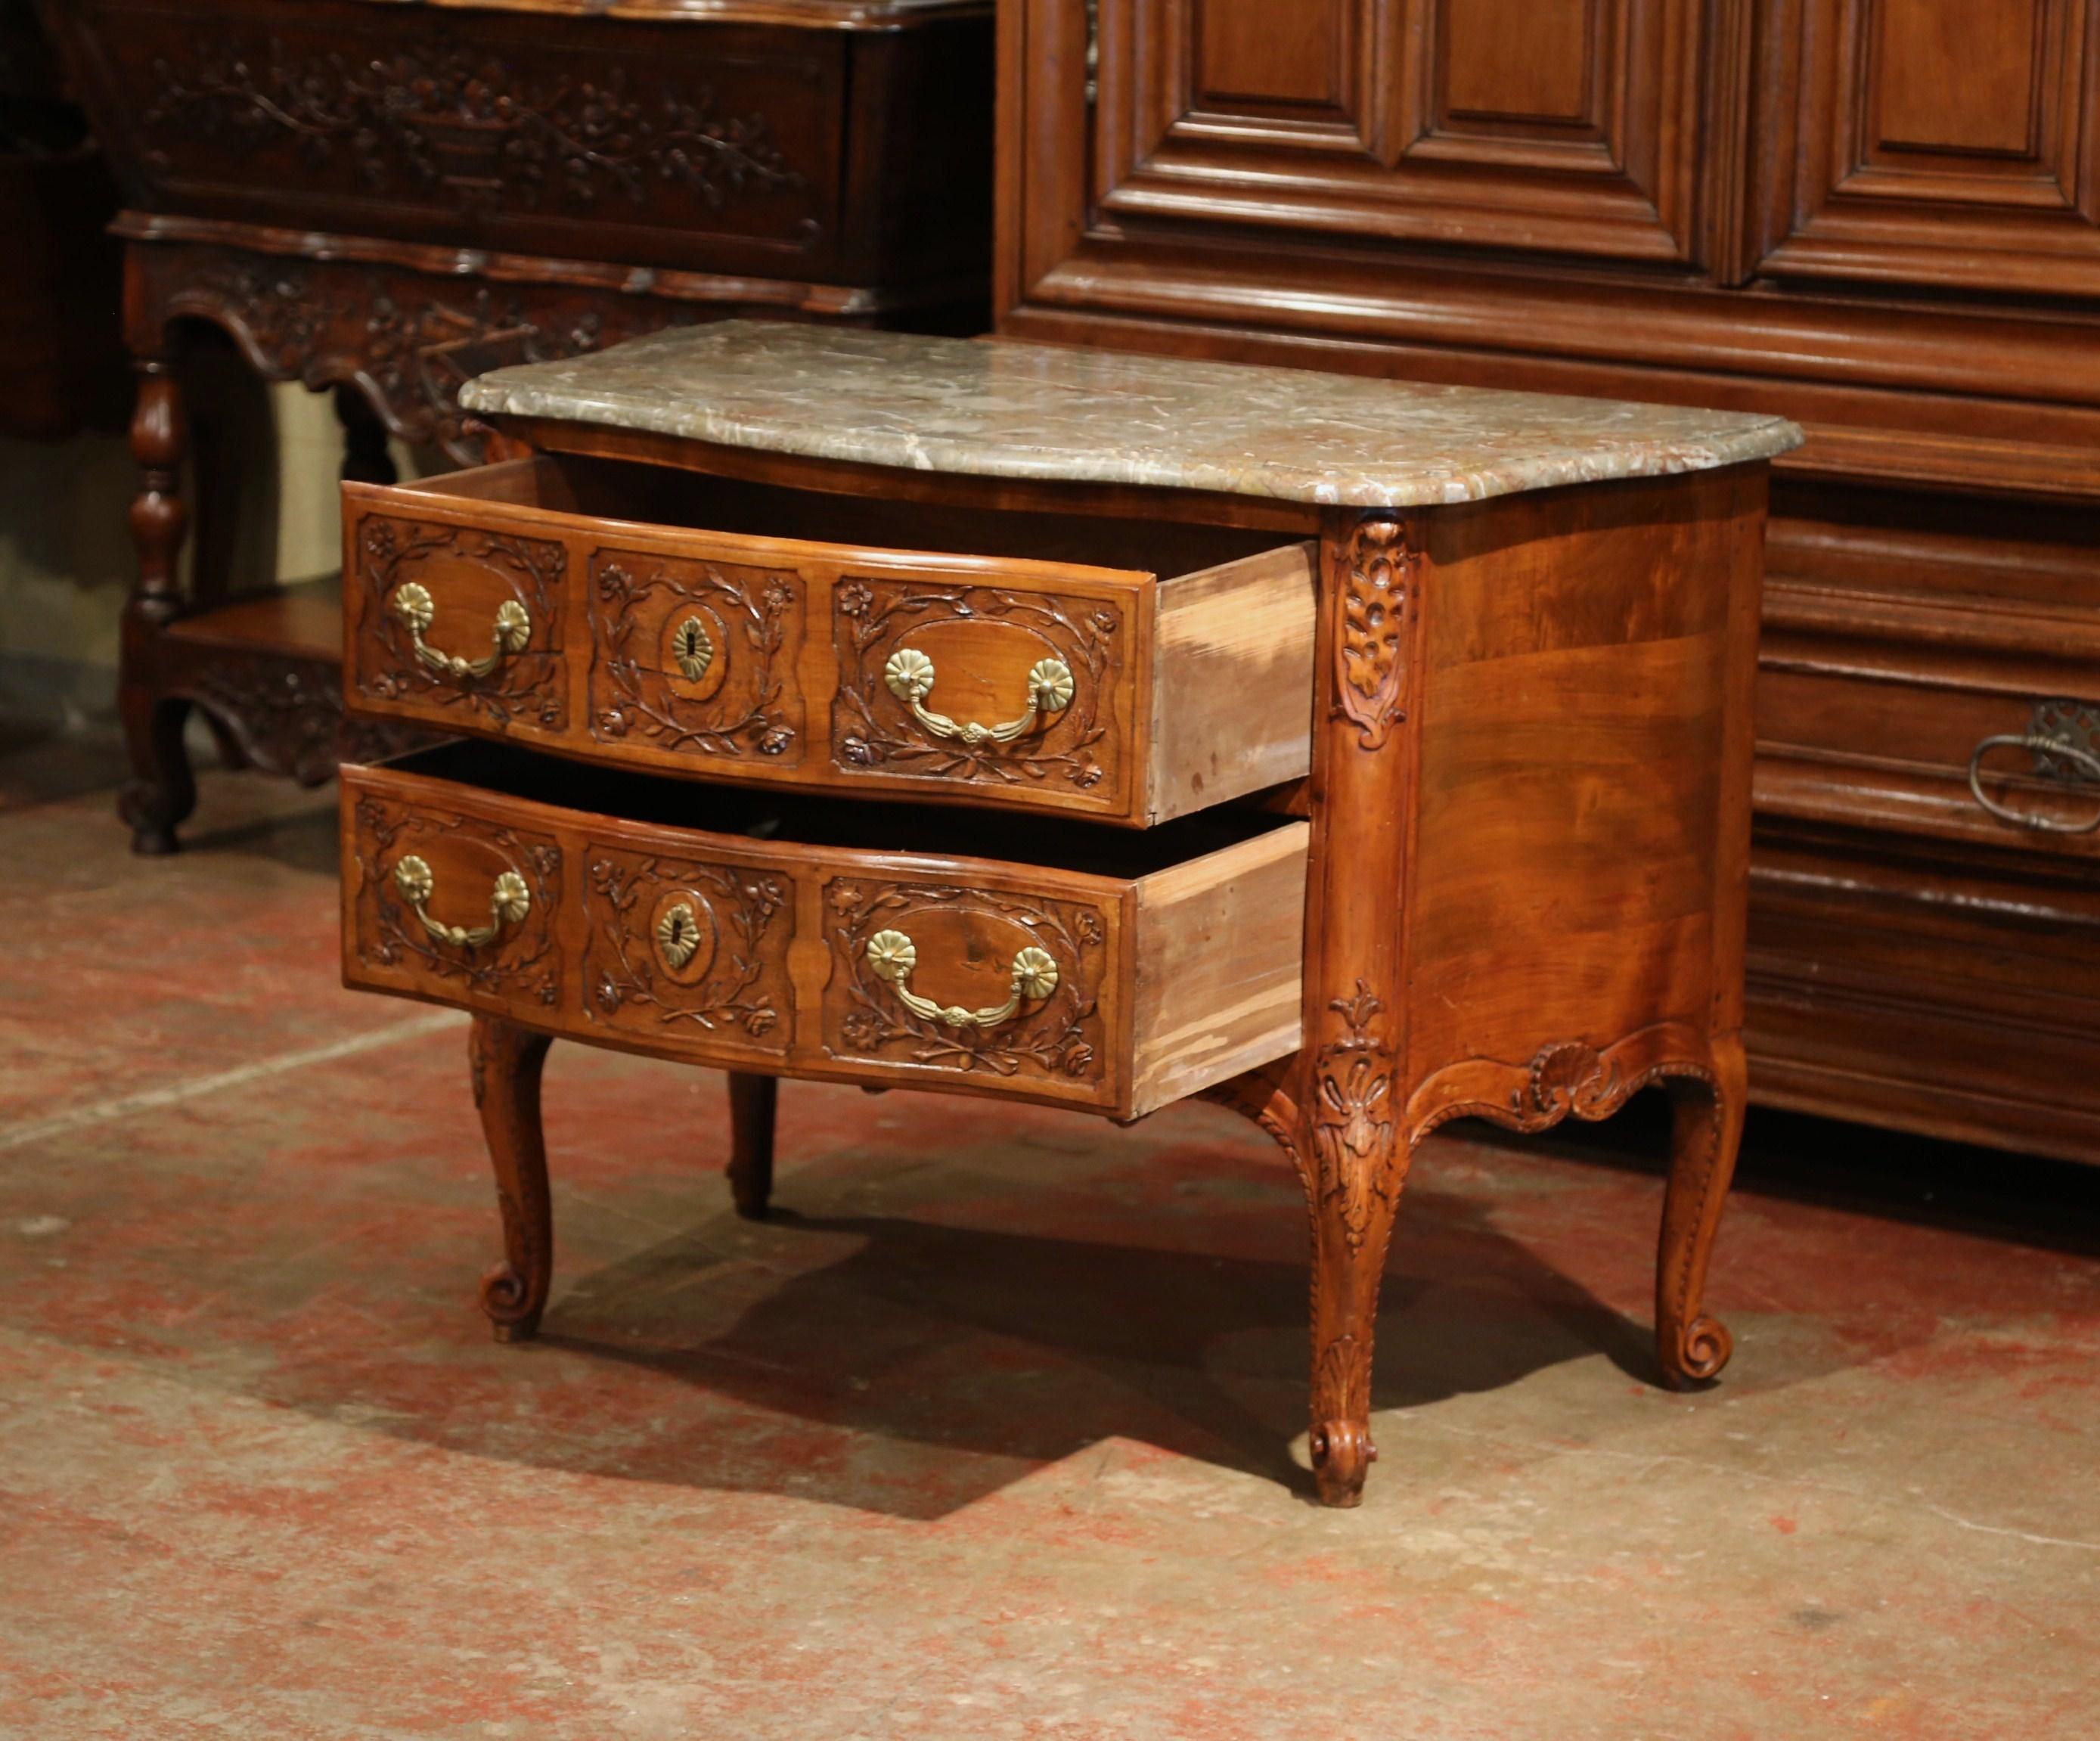 Hand-Carved Mid-19th Century French Marble Top Carved Walnut Bombe Commode Chest of Drawers